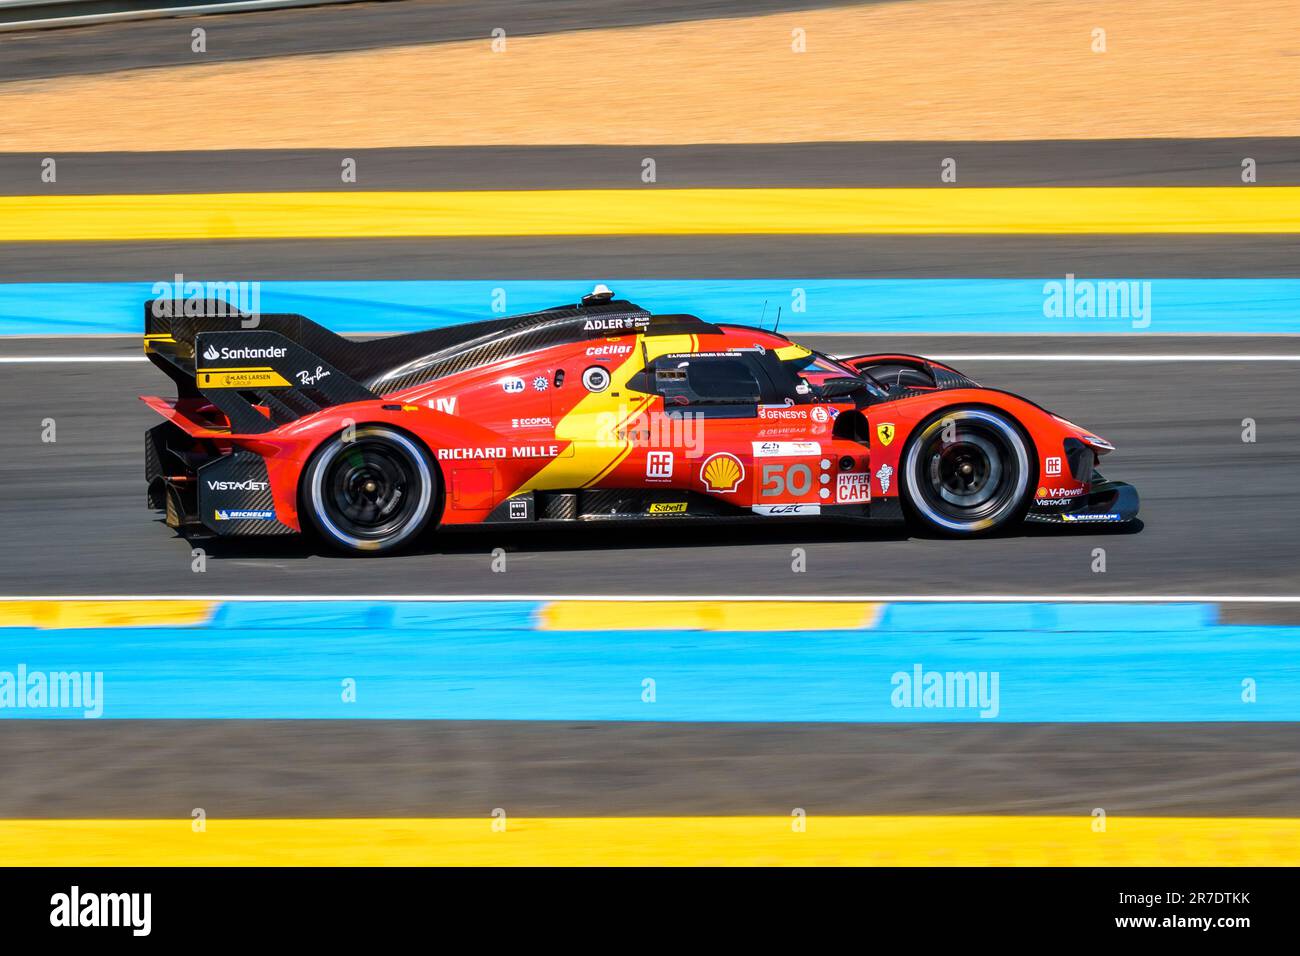 The Ferrari 499P Hypercar race car No. 50, from the AF Corse team, on the Circuit de la Sarthe race track during the 24 hours of Le Mans. Stock Photo